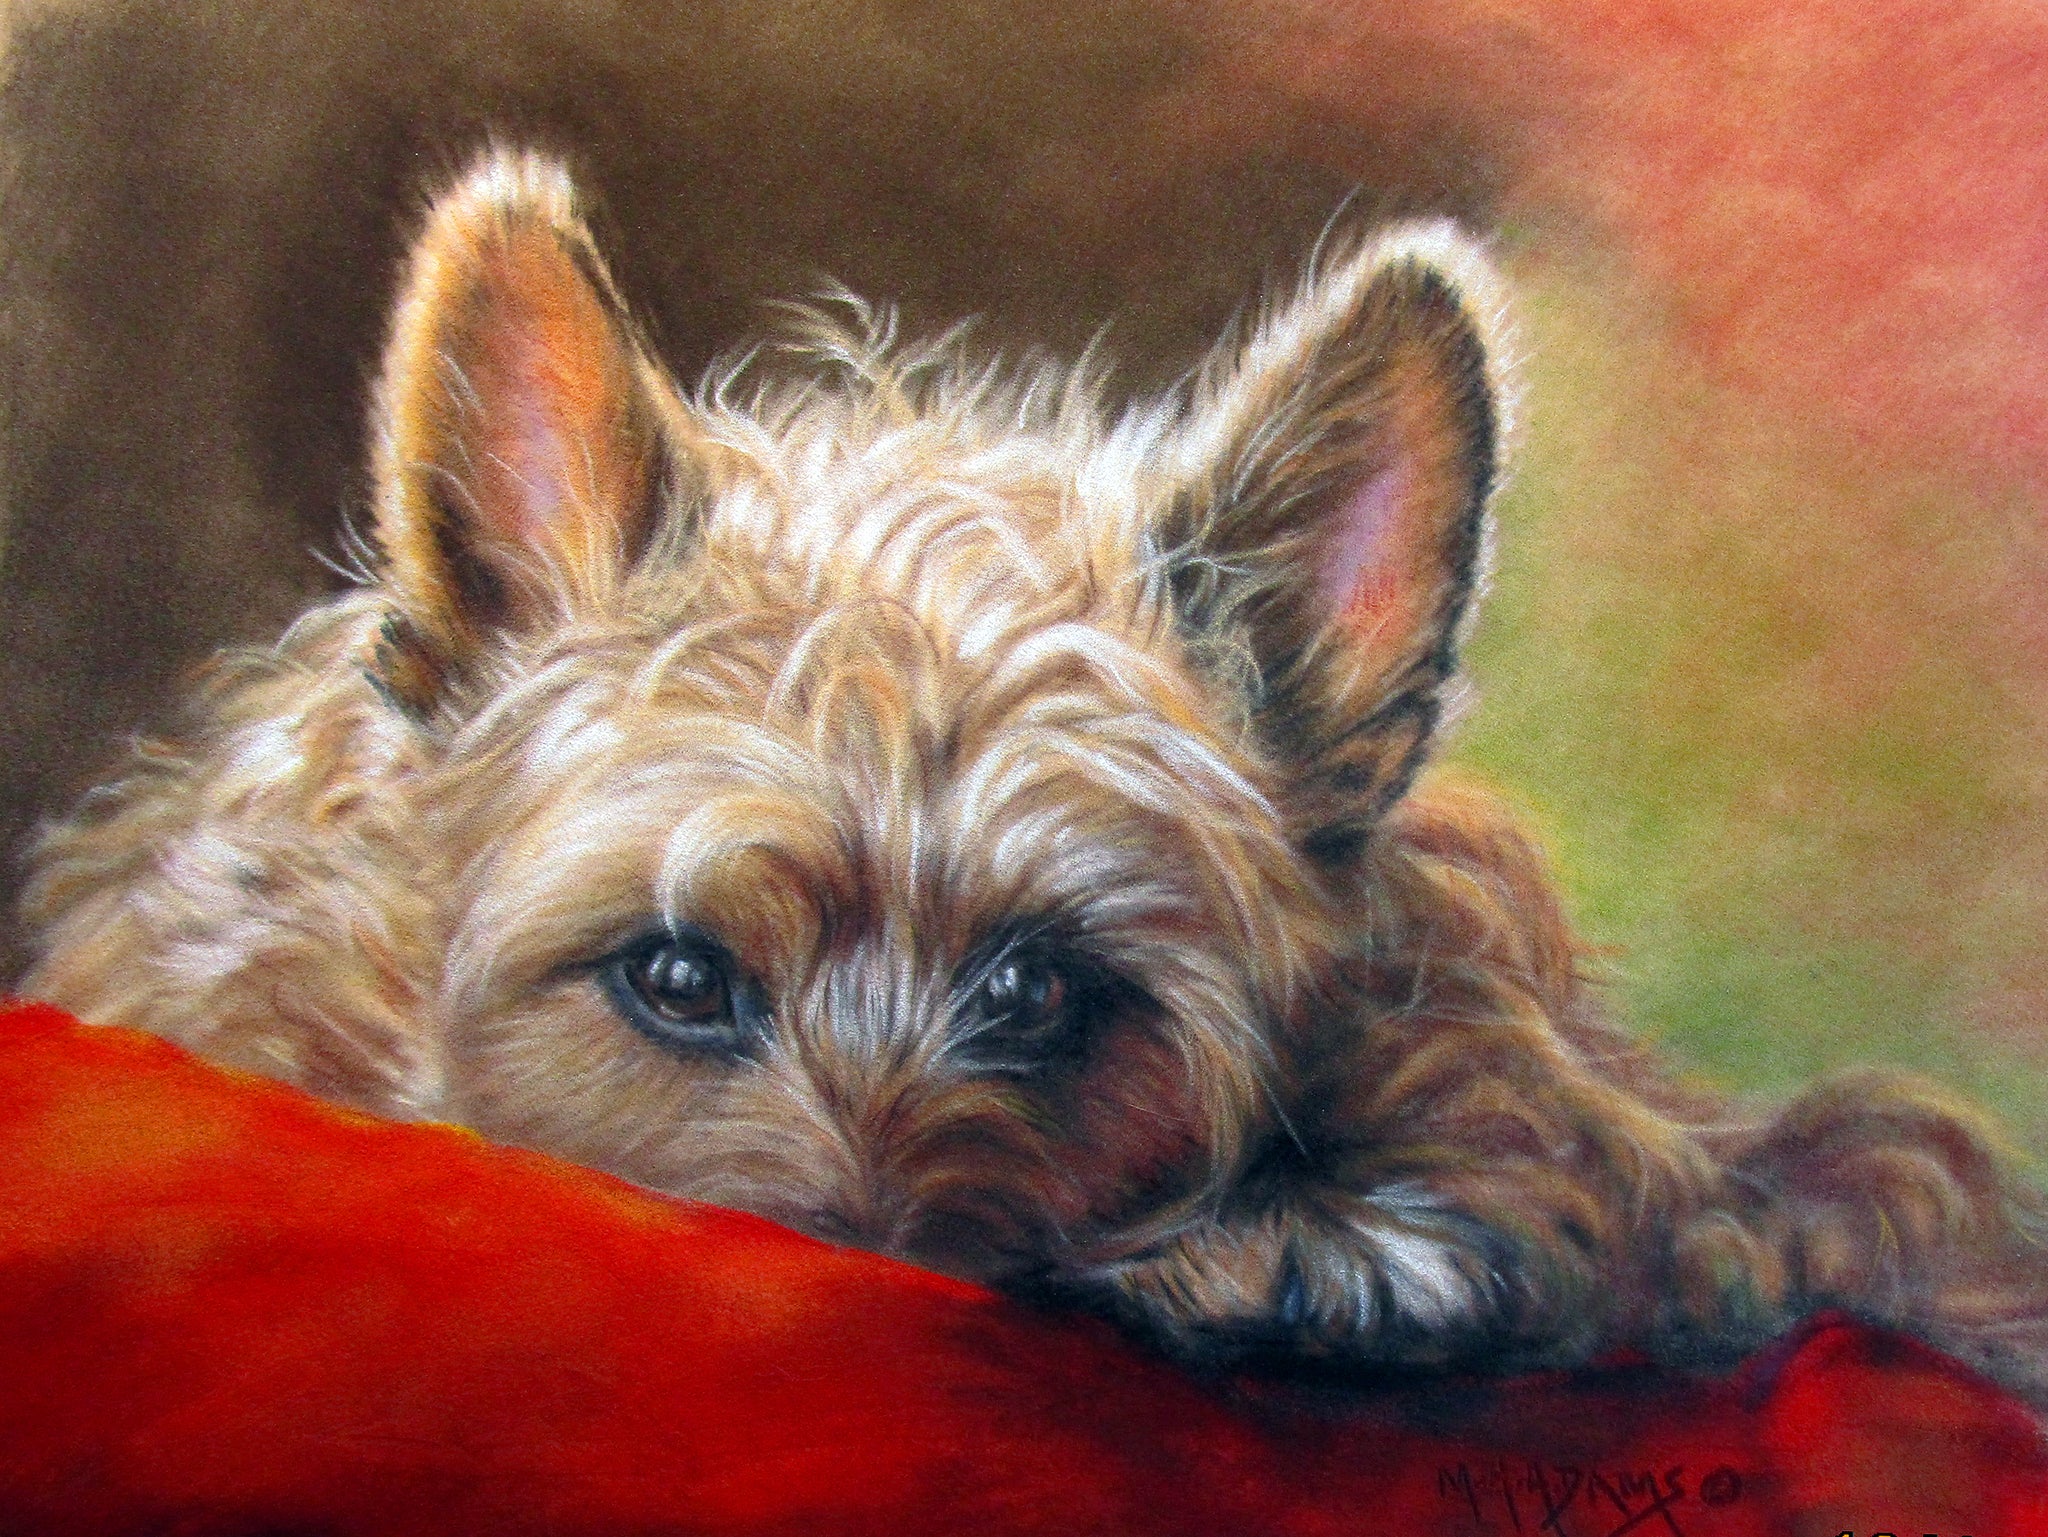 What's All About Alfie, 11"HX14"Wx1.5"D